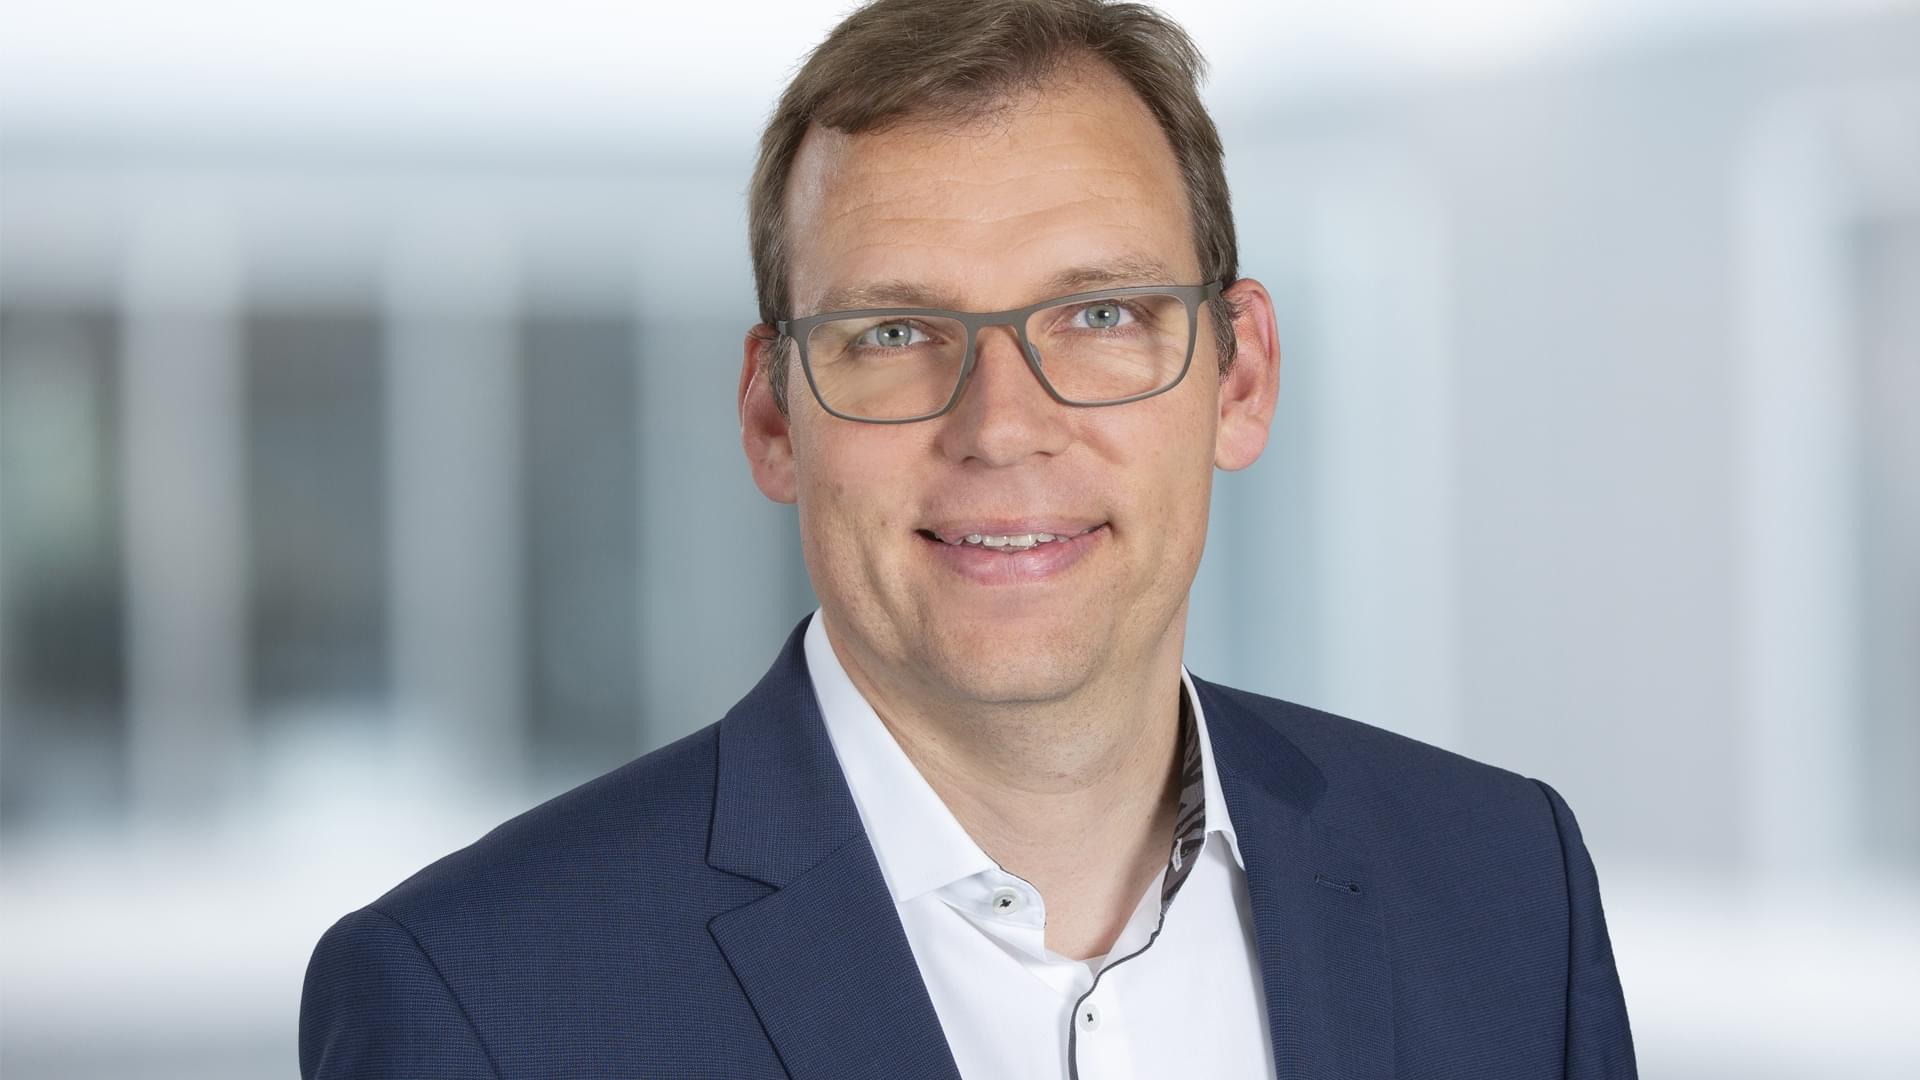 Portrait photo of Andreas Wimmer, Member of the Management Board of Knorr-Bremse Commercial Vehicle Systems